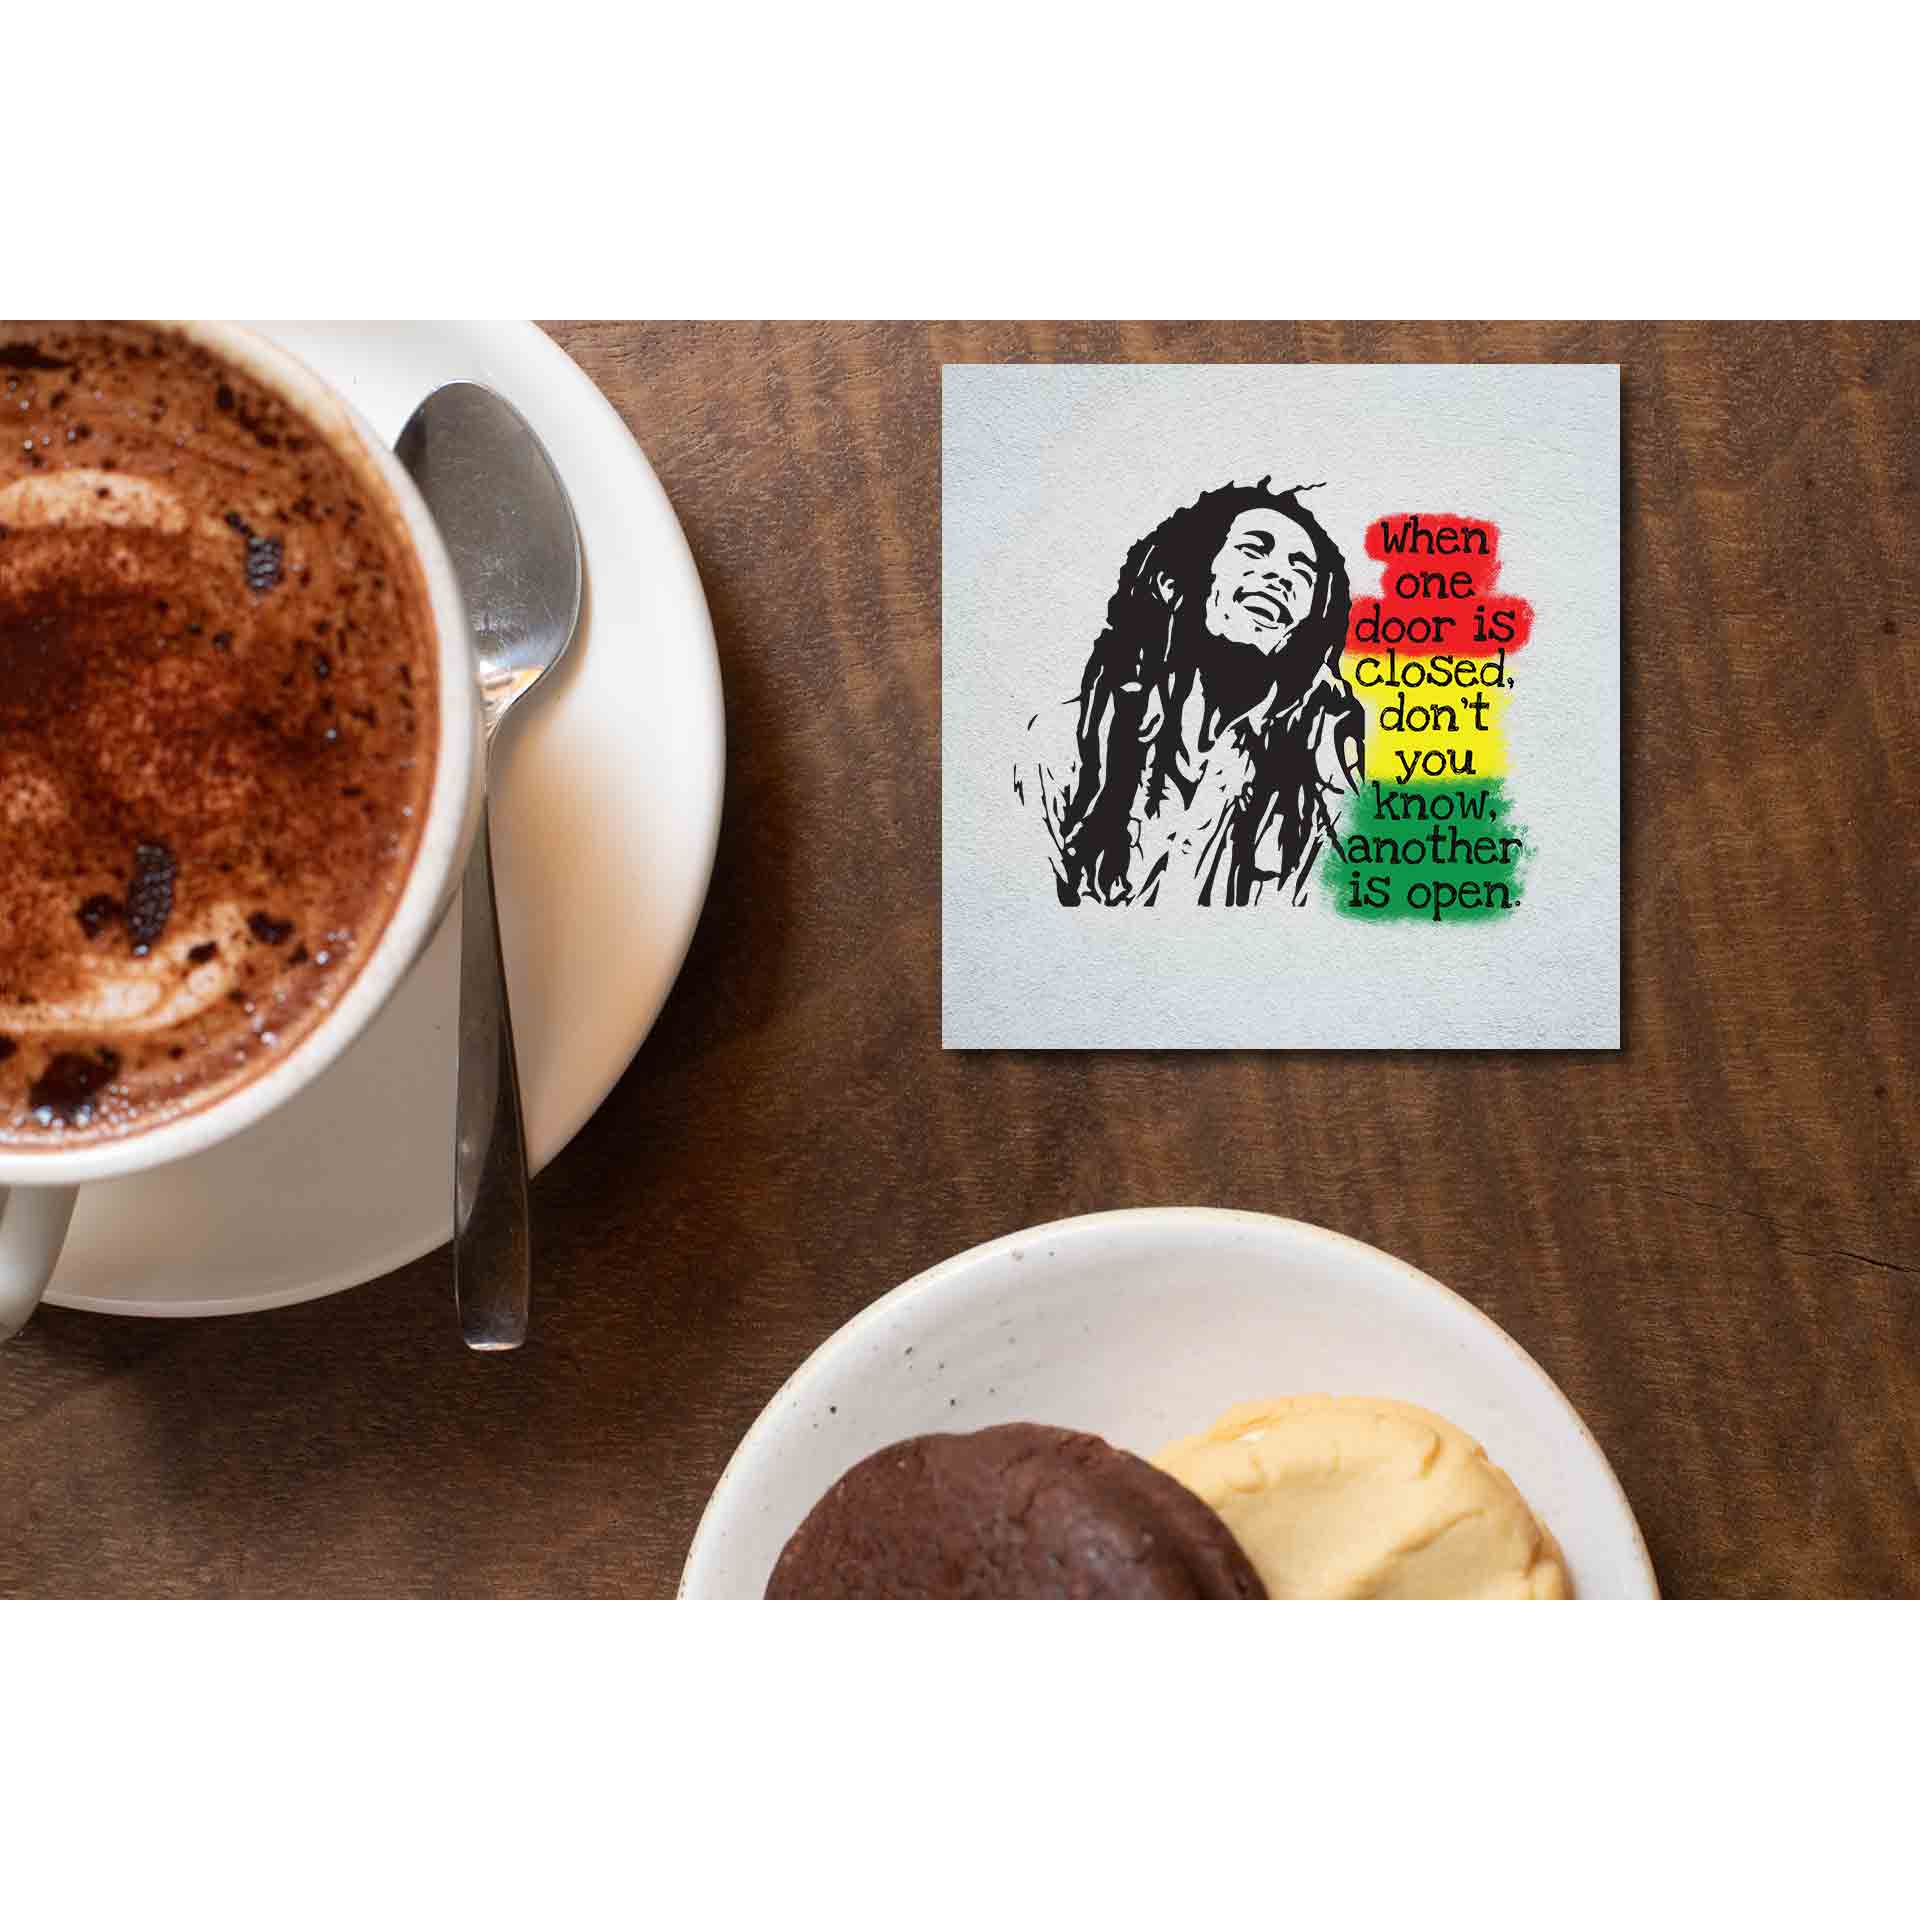 bob marley when one door is closed coasters wooden table cups indian music band buy online india the banyan tee tbt men women girls boys unisex